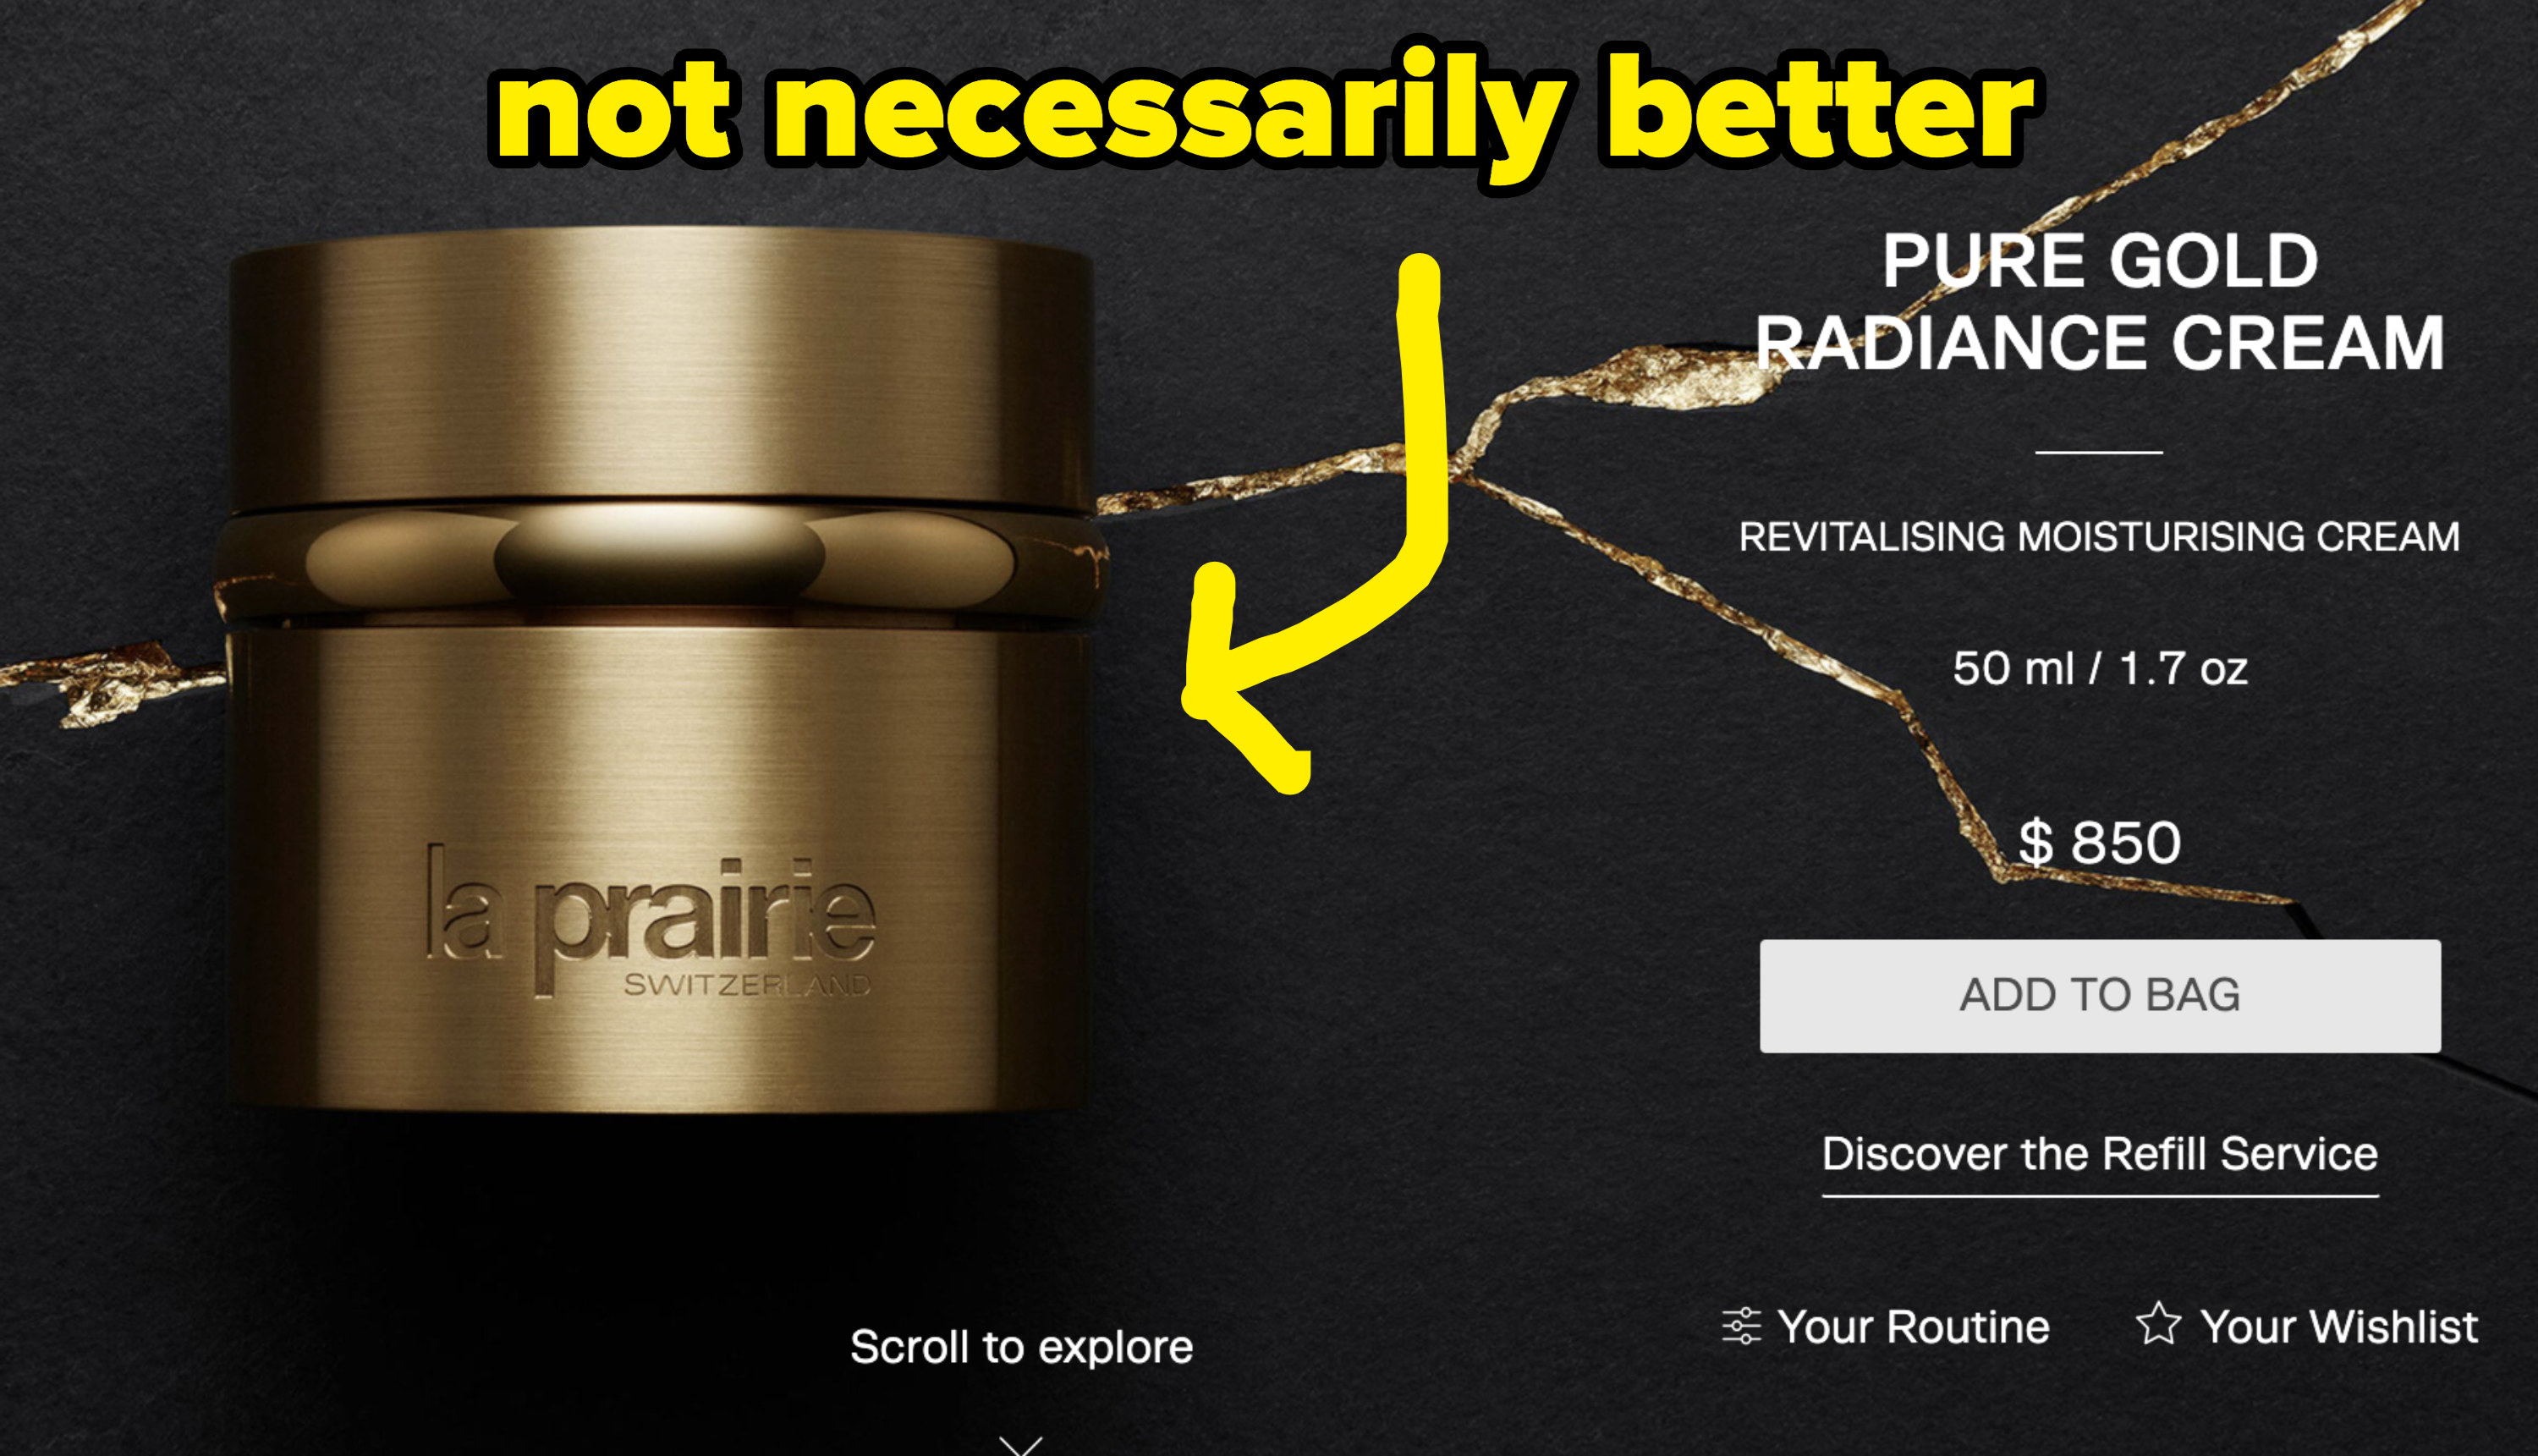 La Prairie pure gold radiance cream labeled &quot;not necessarily better&quot;